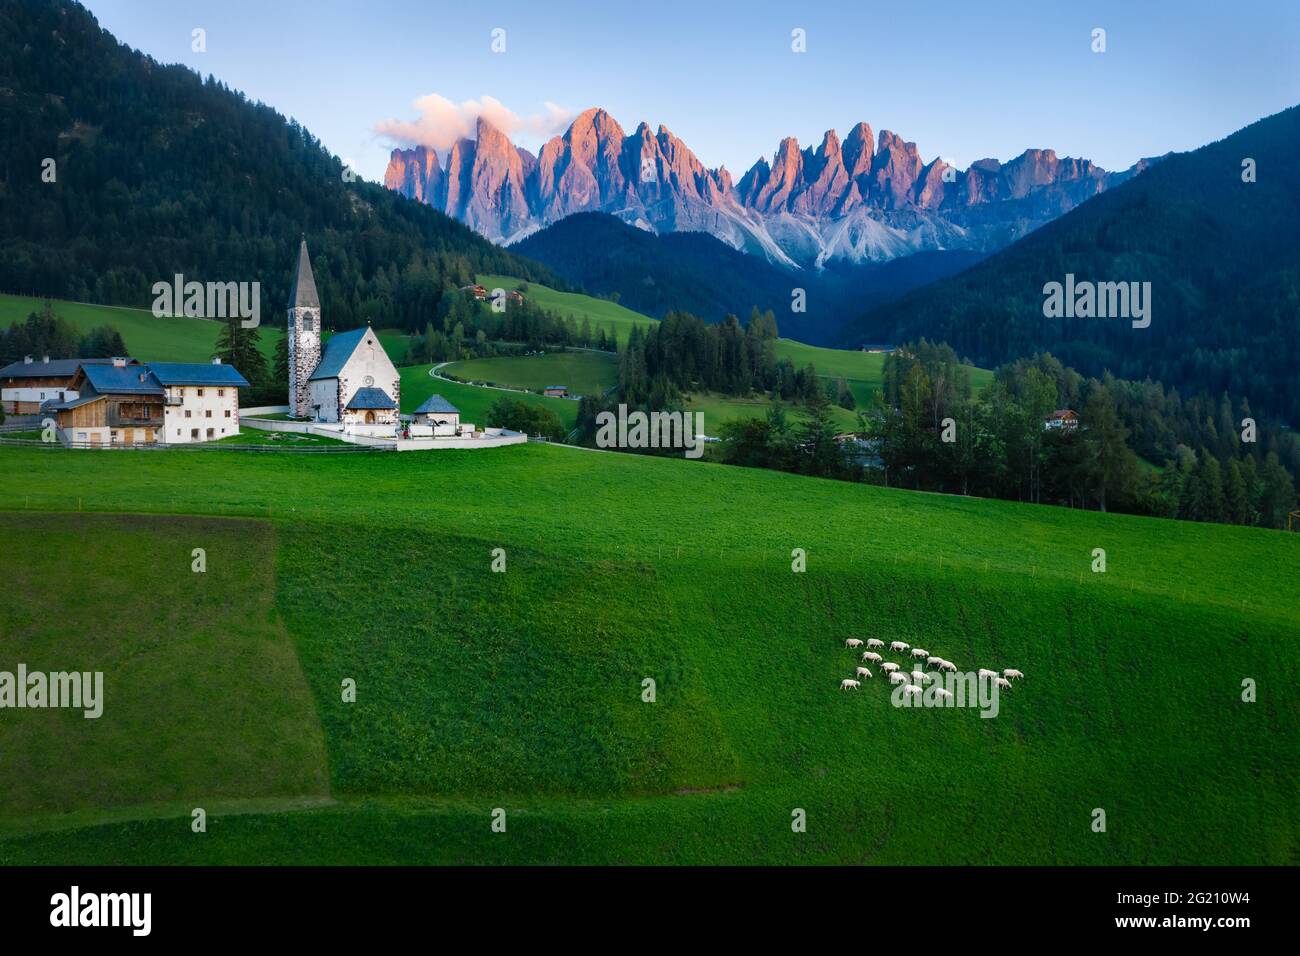 Group of white sheep on a meadow in front of Santa Maddalena church. Val di Funes, Val di Funes. Dolomites, Trentino Alto Adige, Italy, Europe. Stock Photo